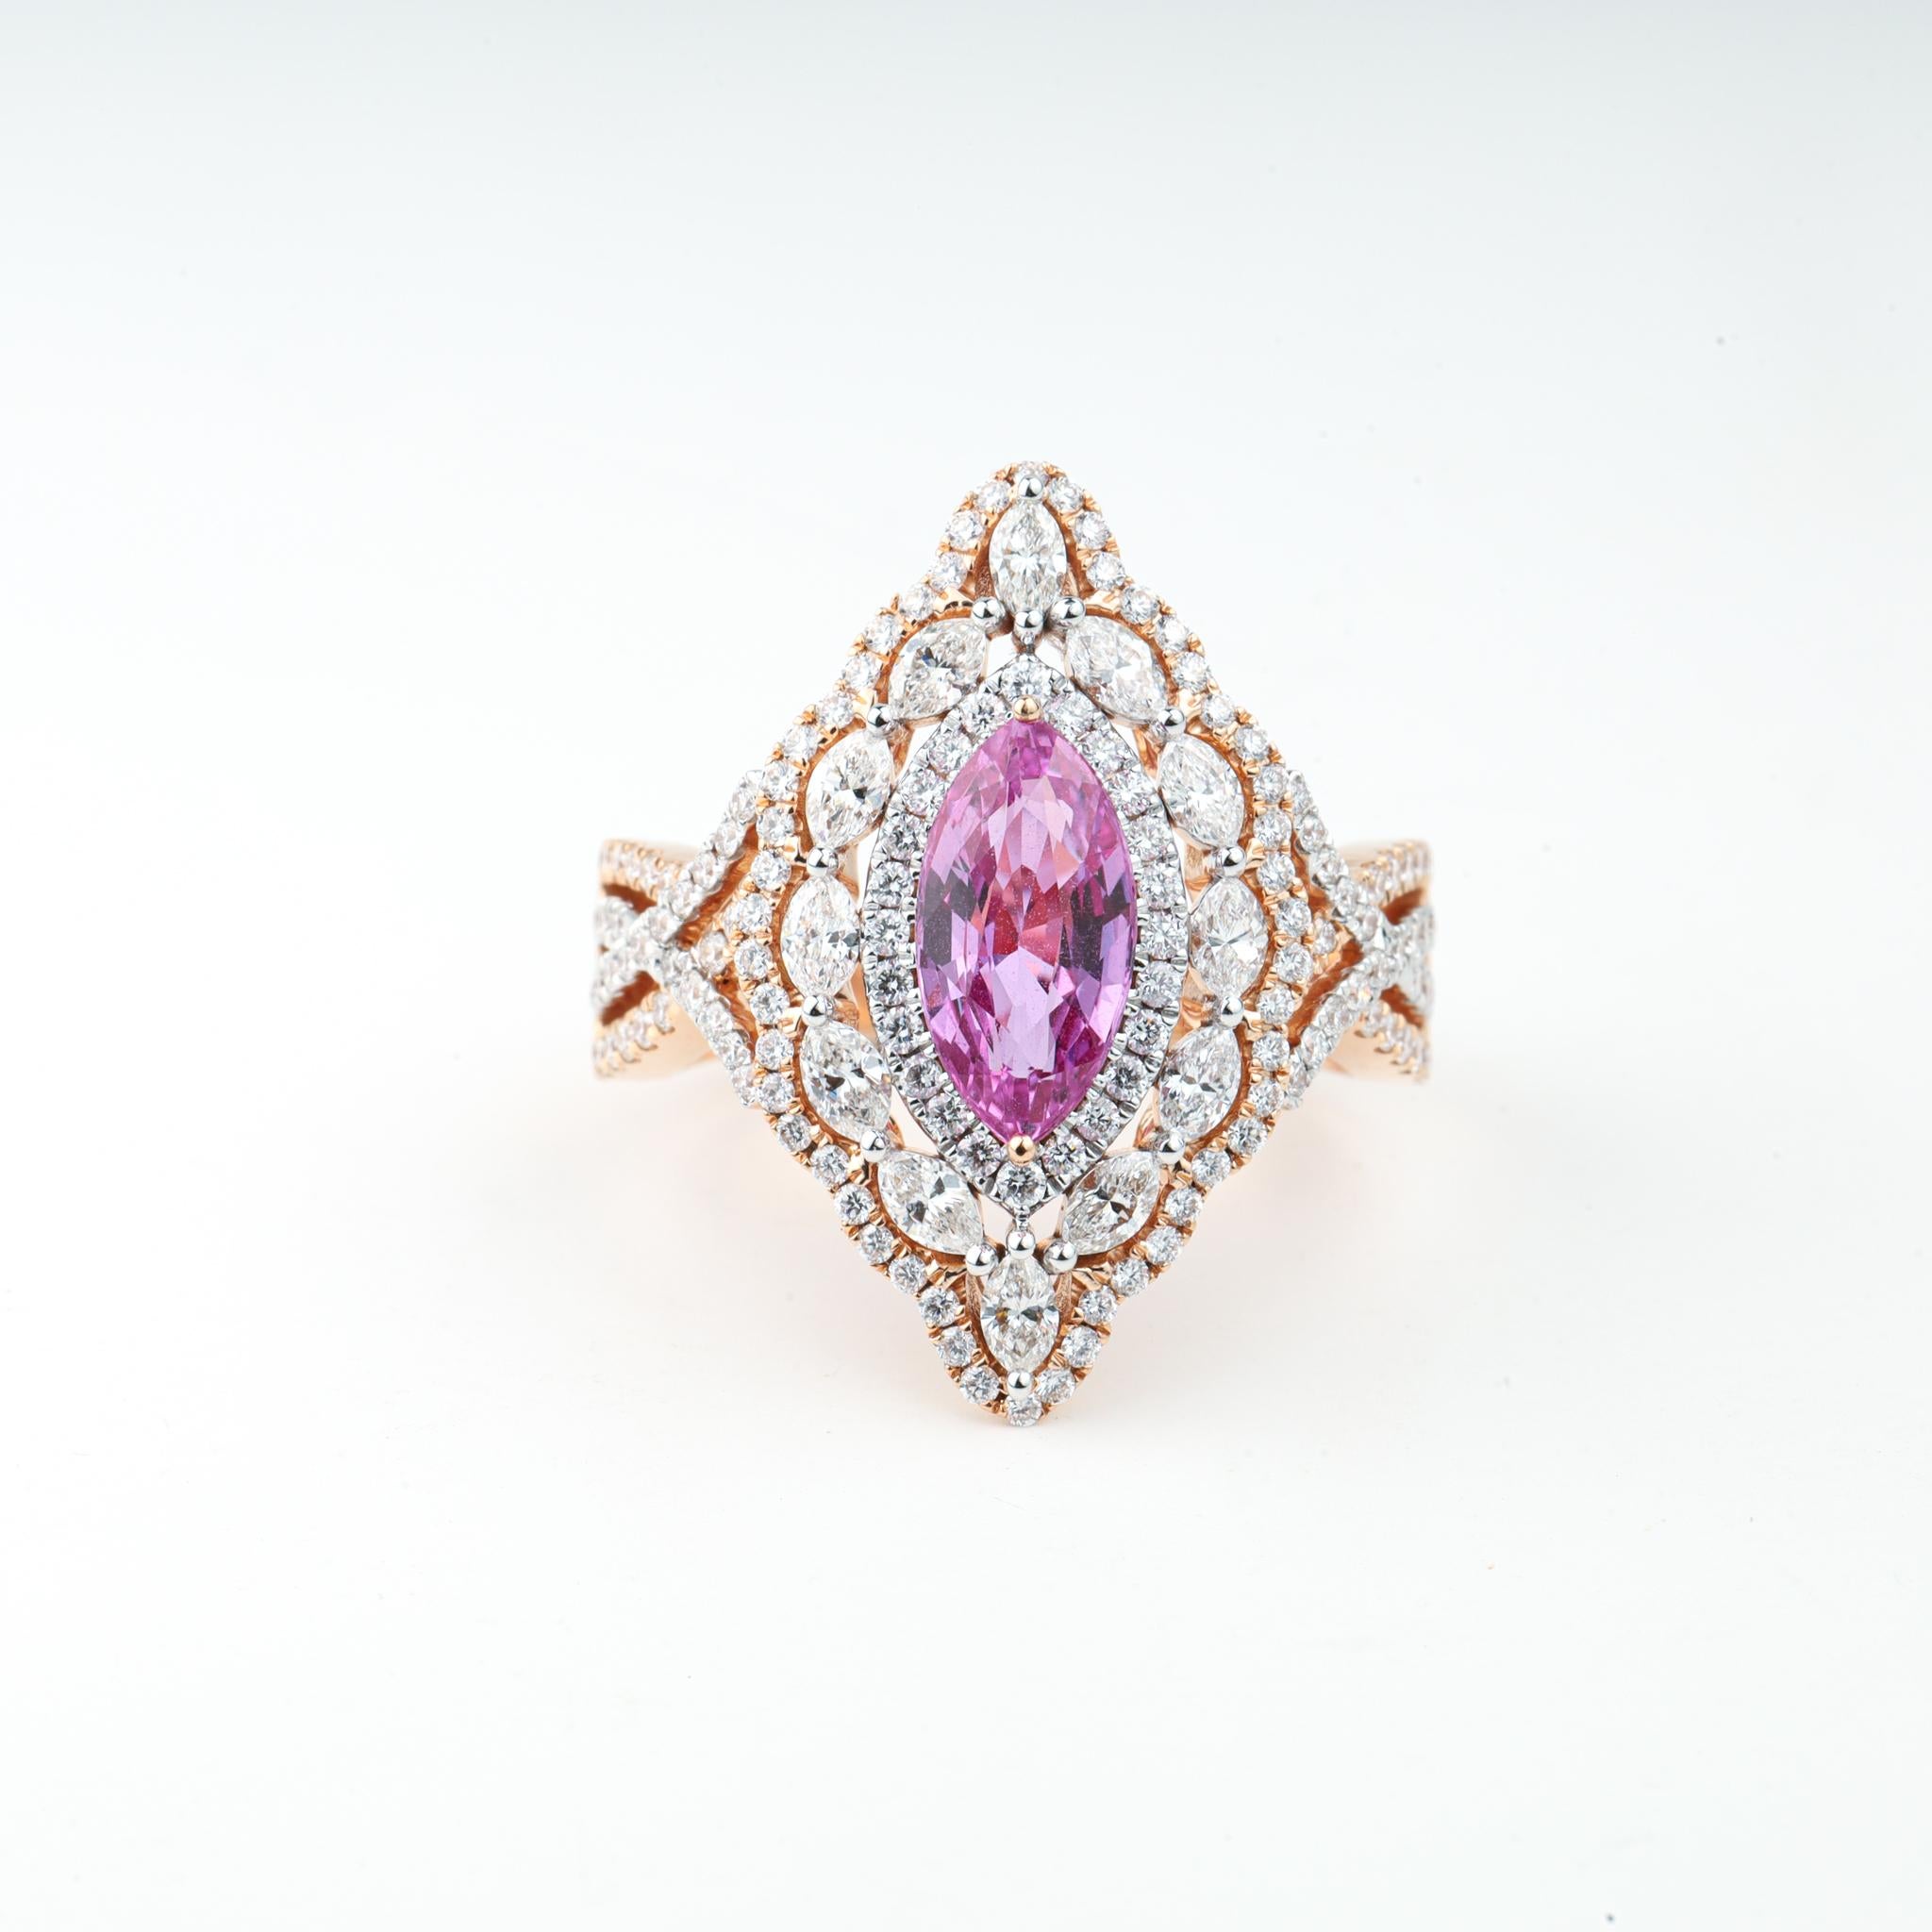 2 Carat Pink Sapphire Diamond Cocktail Engagement Ring in 18k Yellow Gold For Sale 2